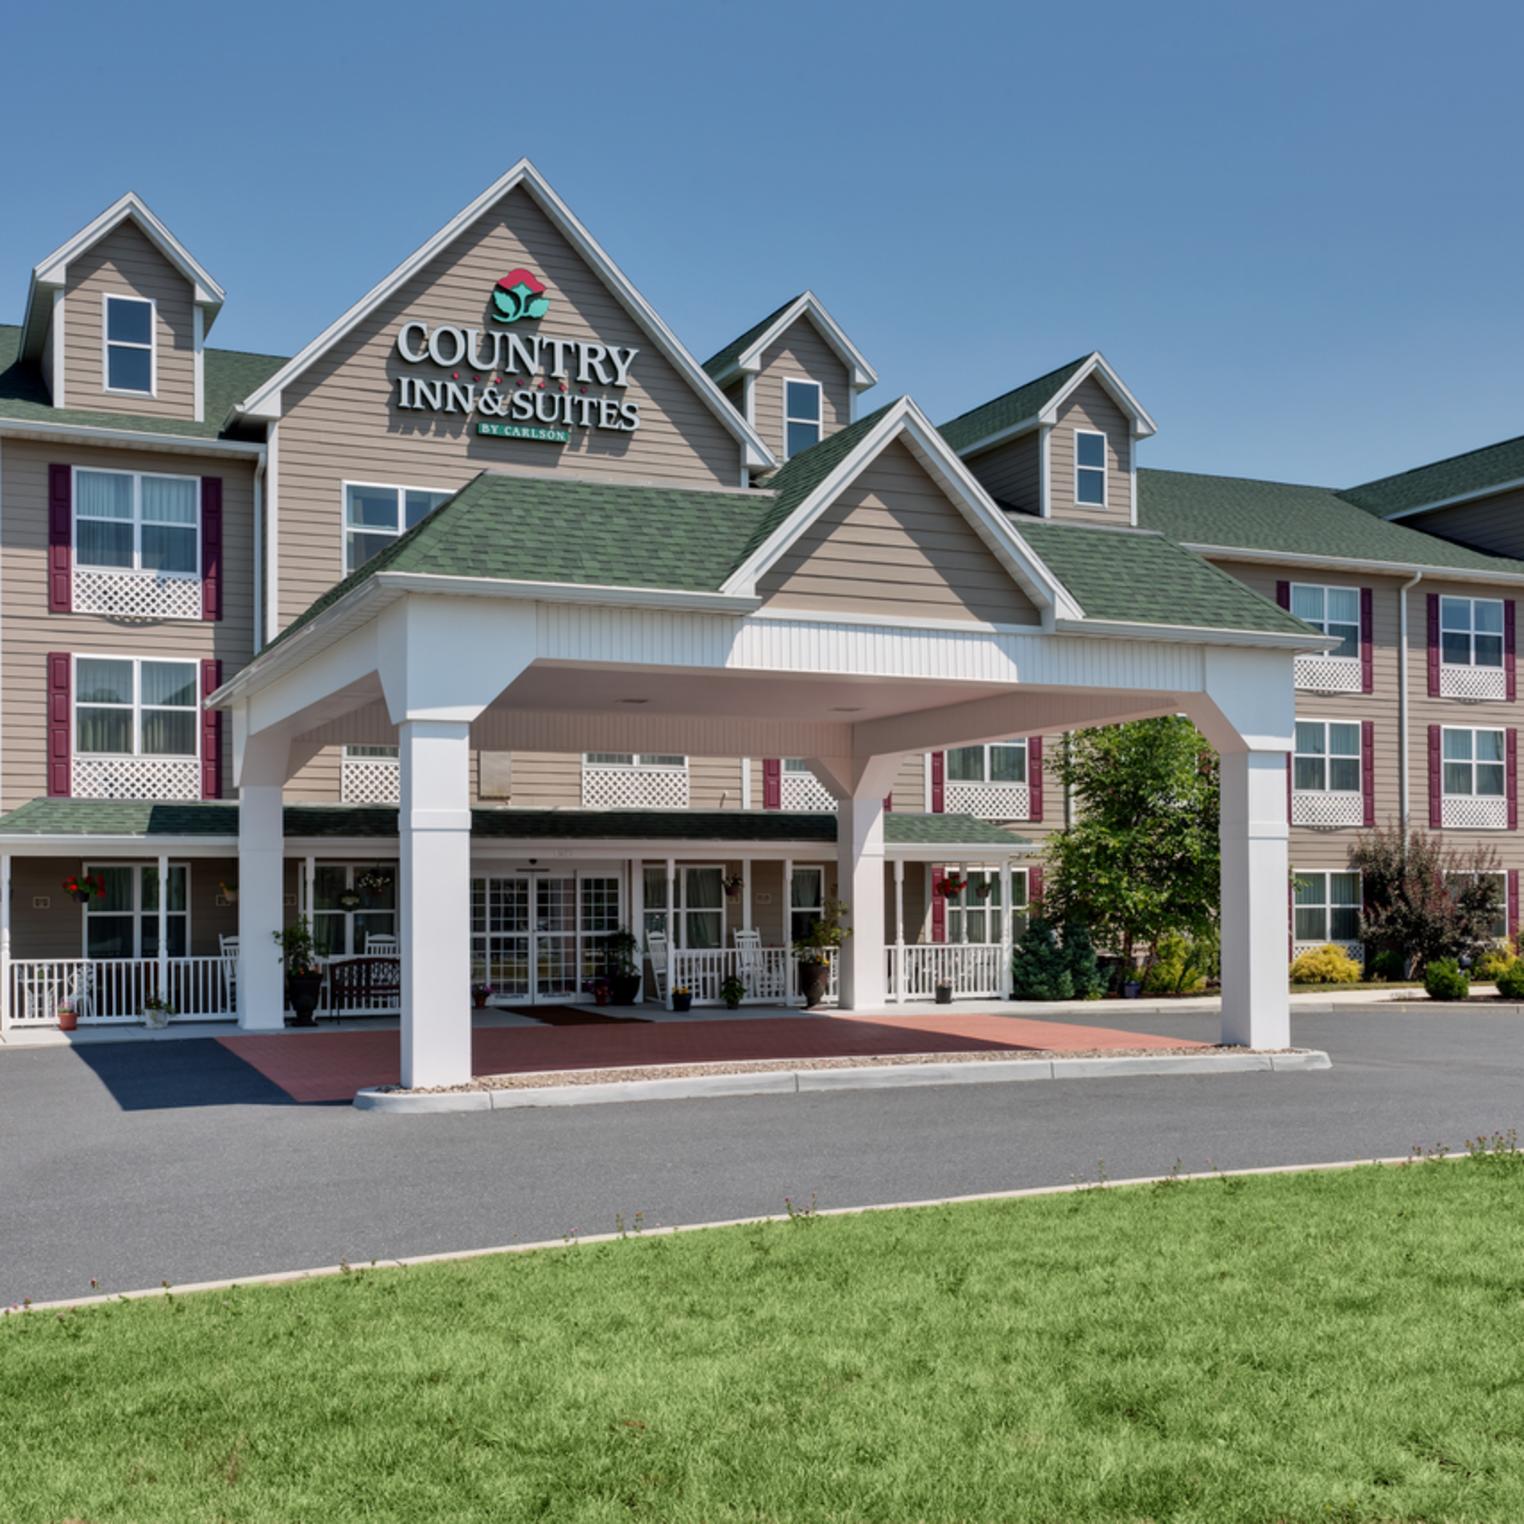 Country Inn and Suites Front Exterior Daytime